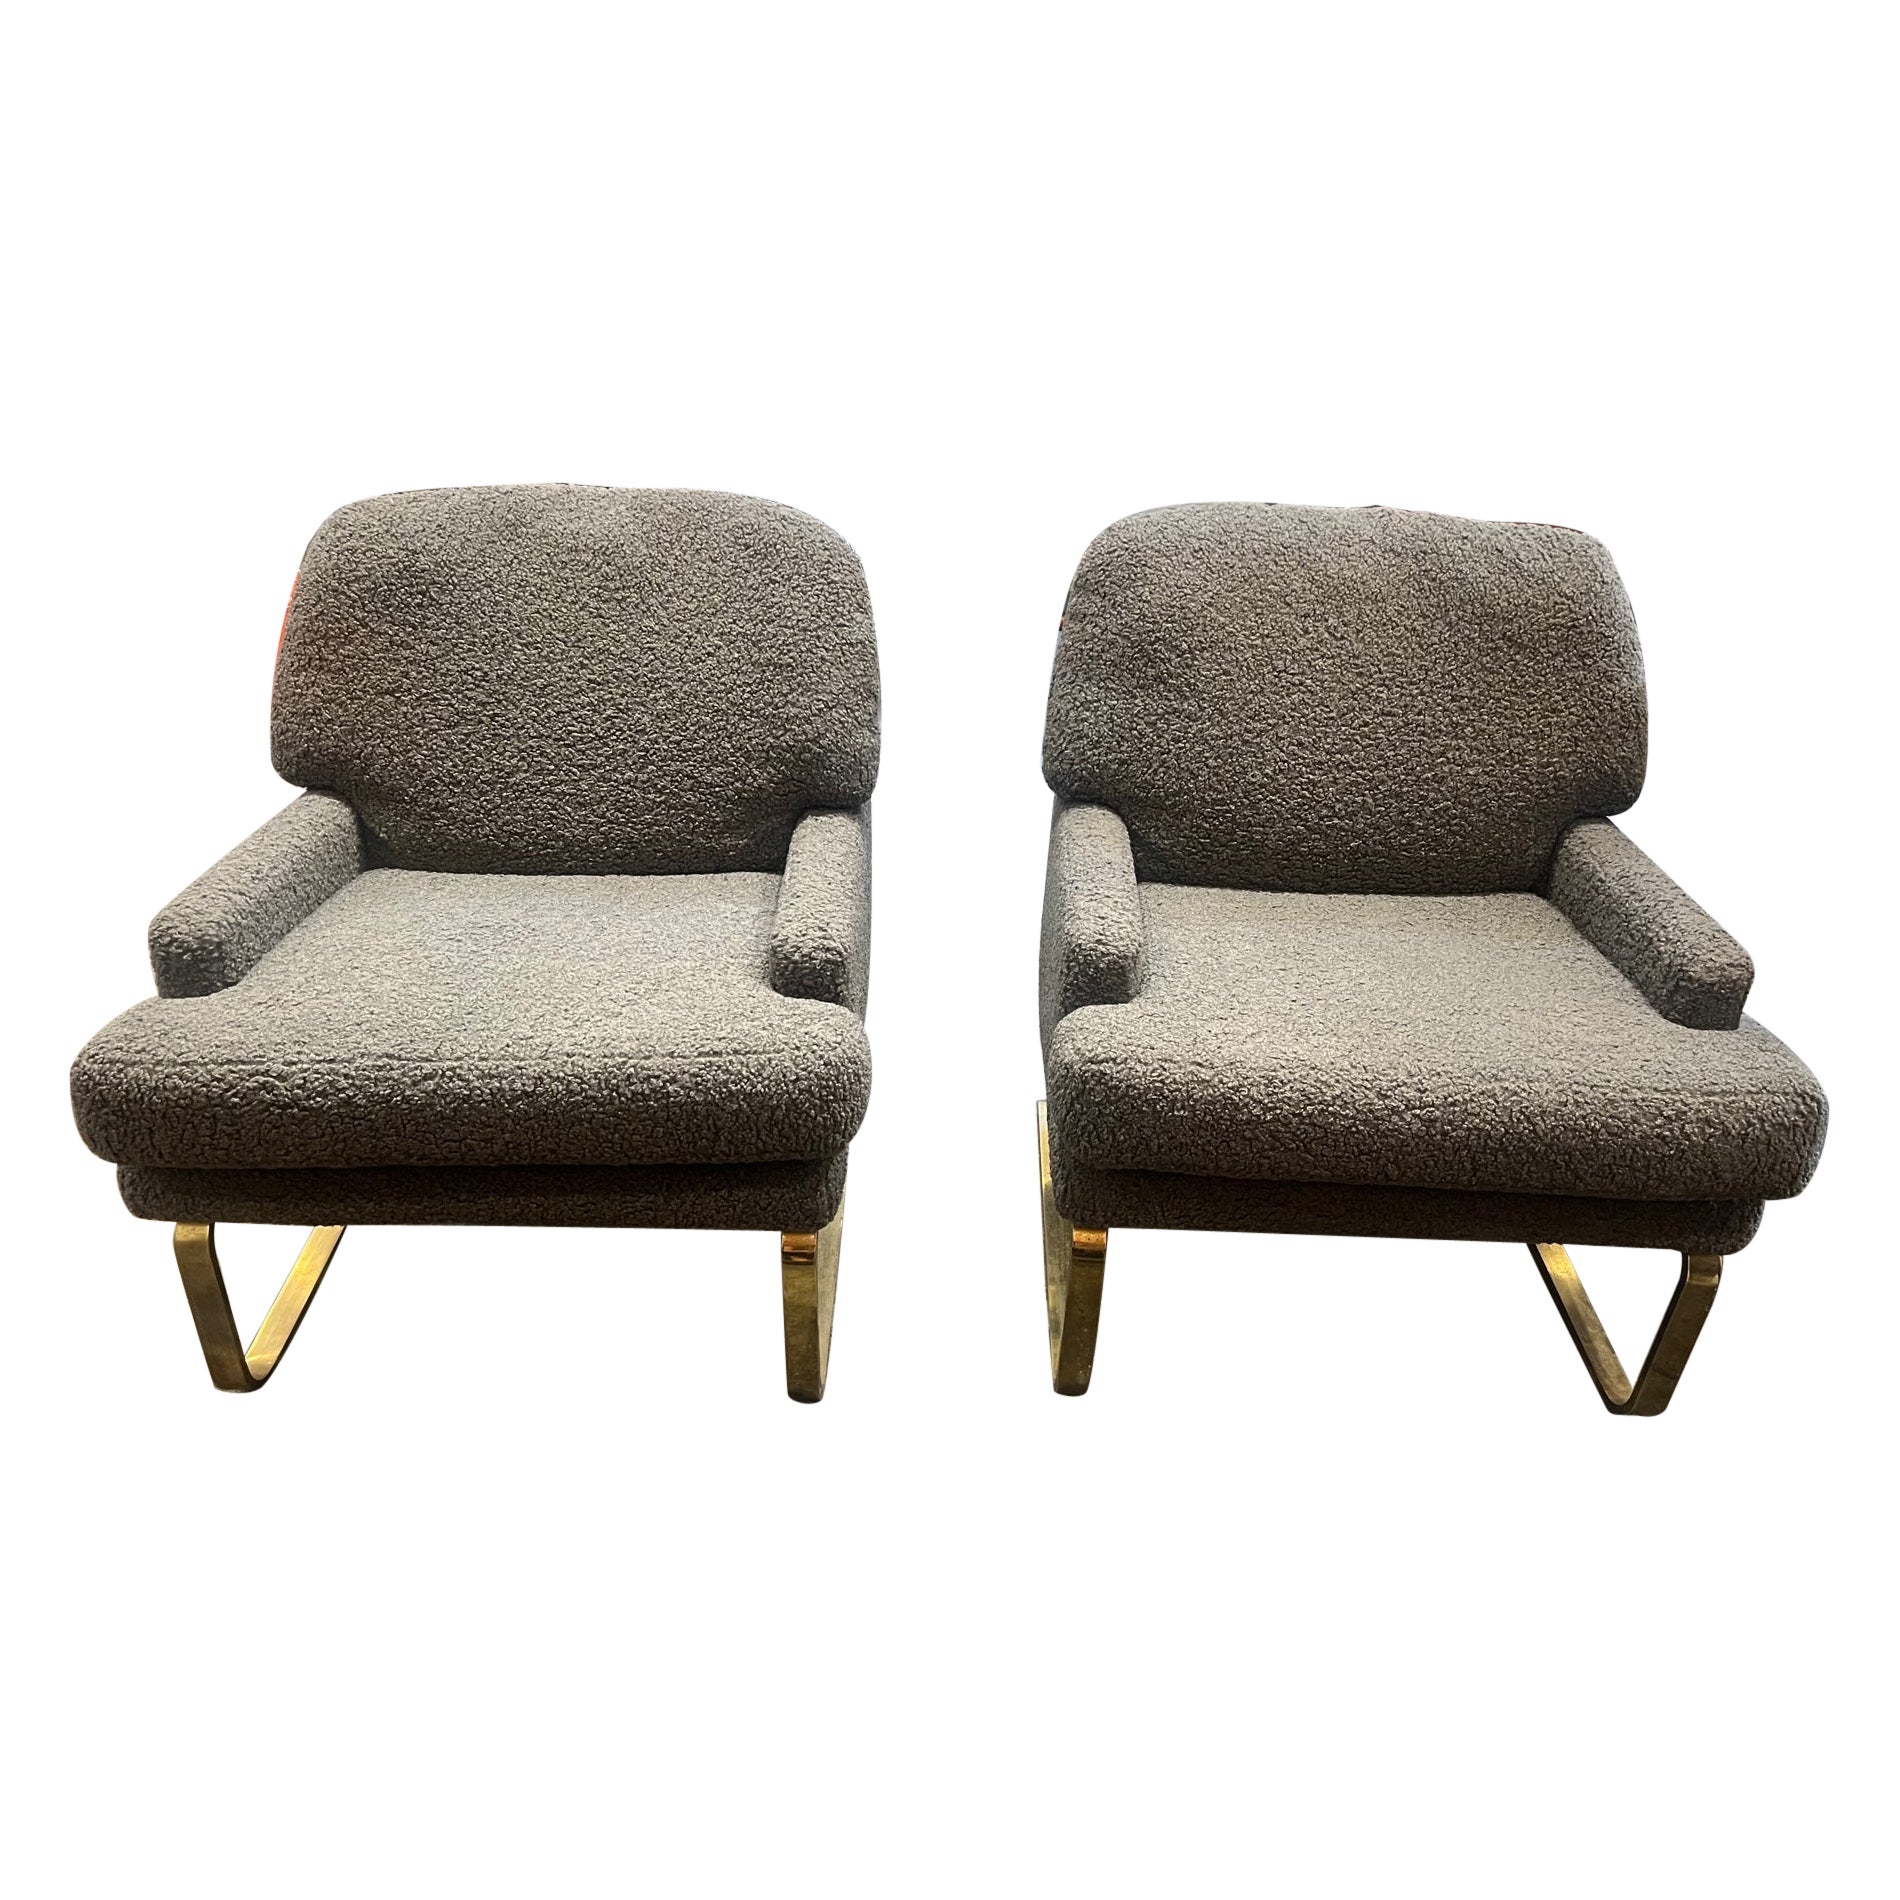 Vintage French Pair of Boucle Lounge Chairs  in excellent condition